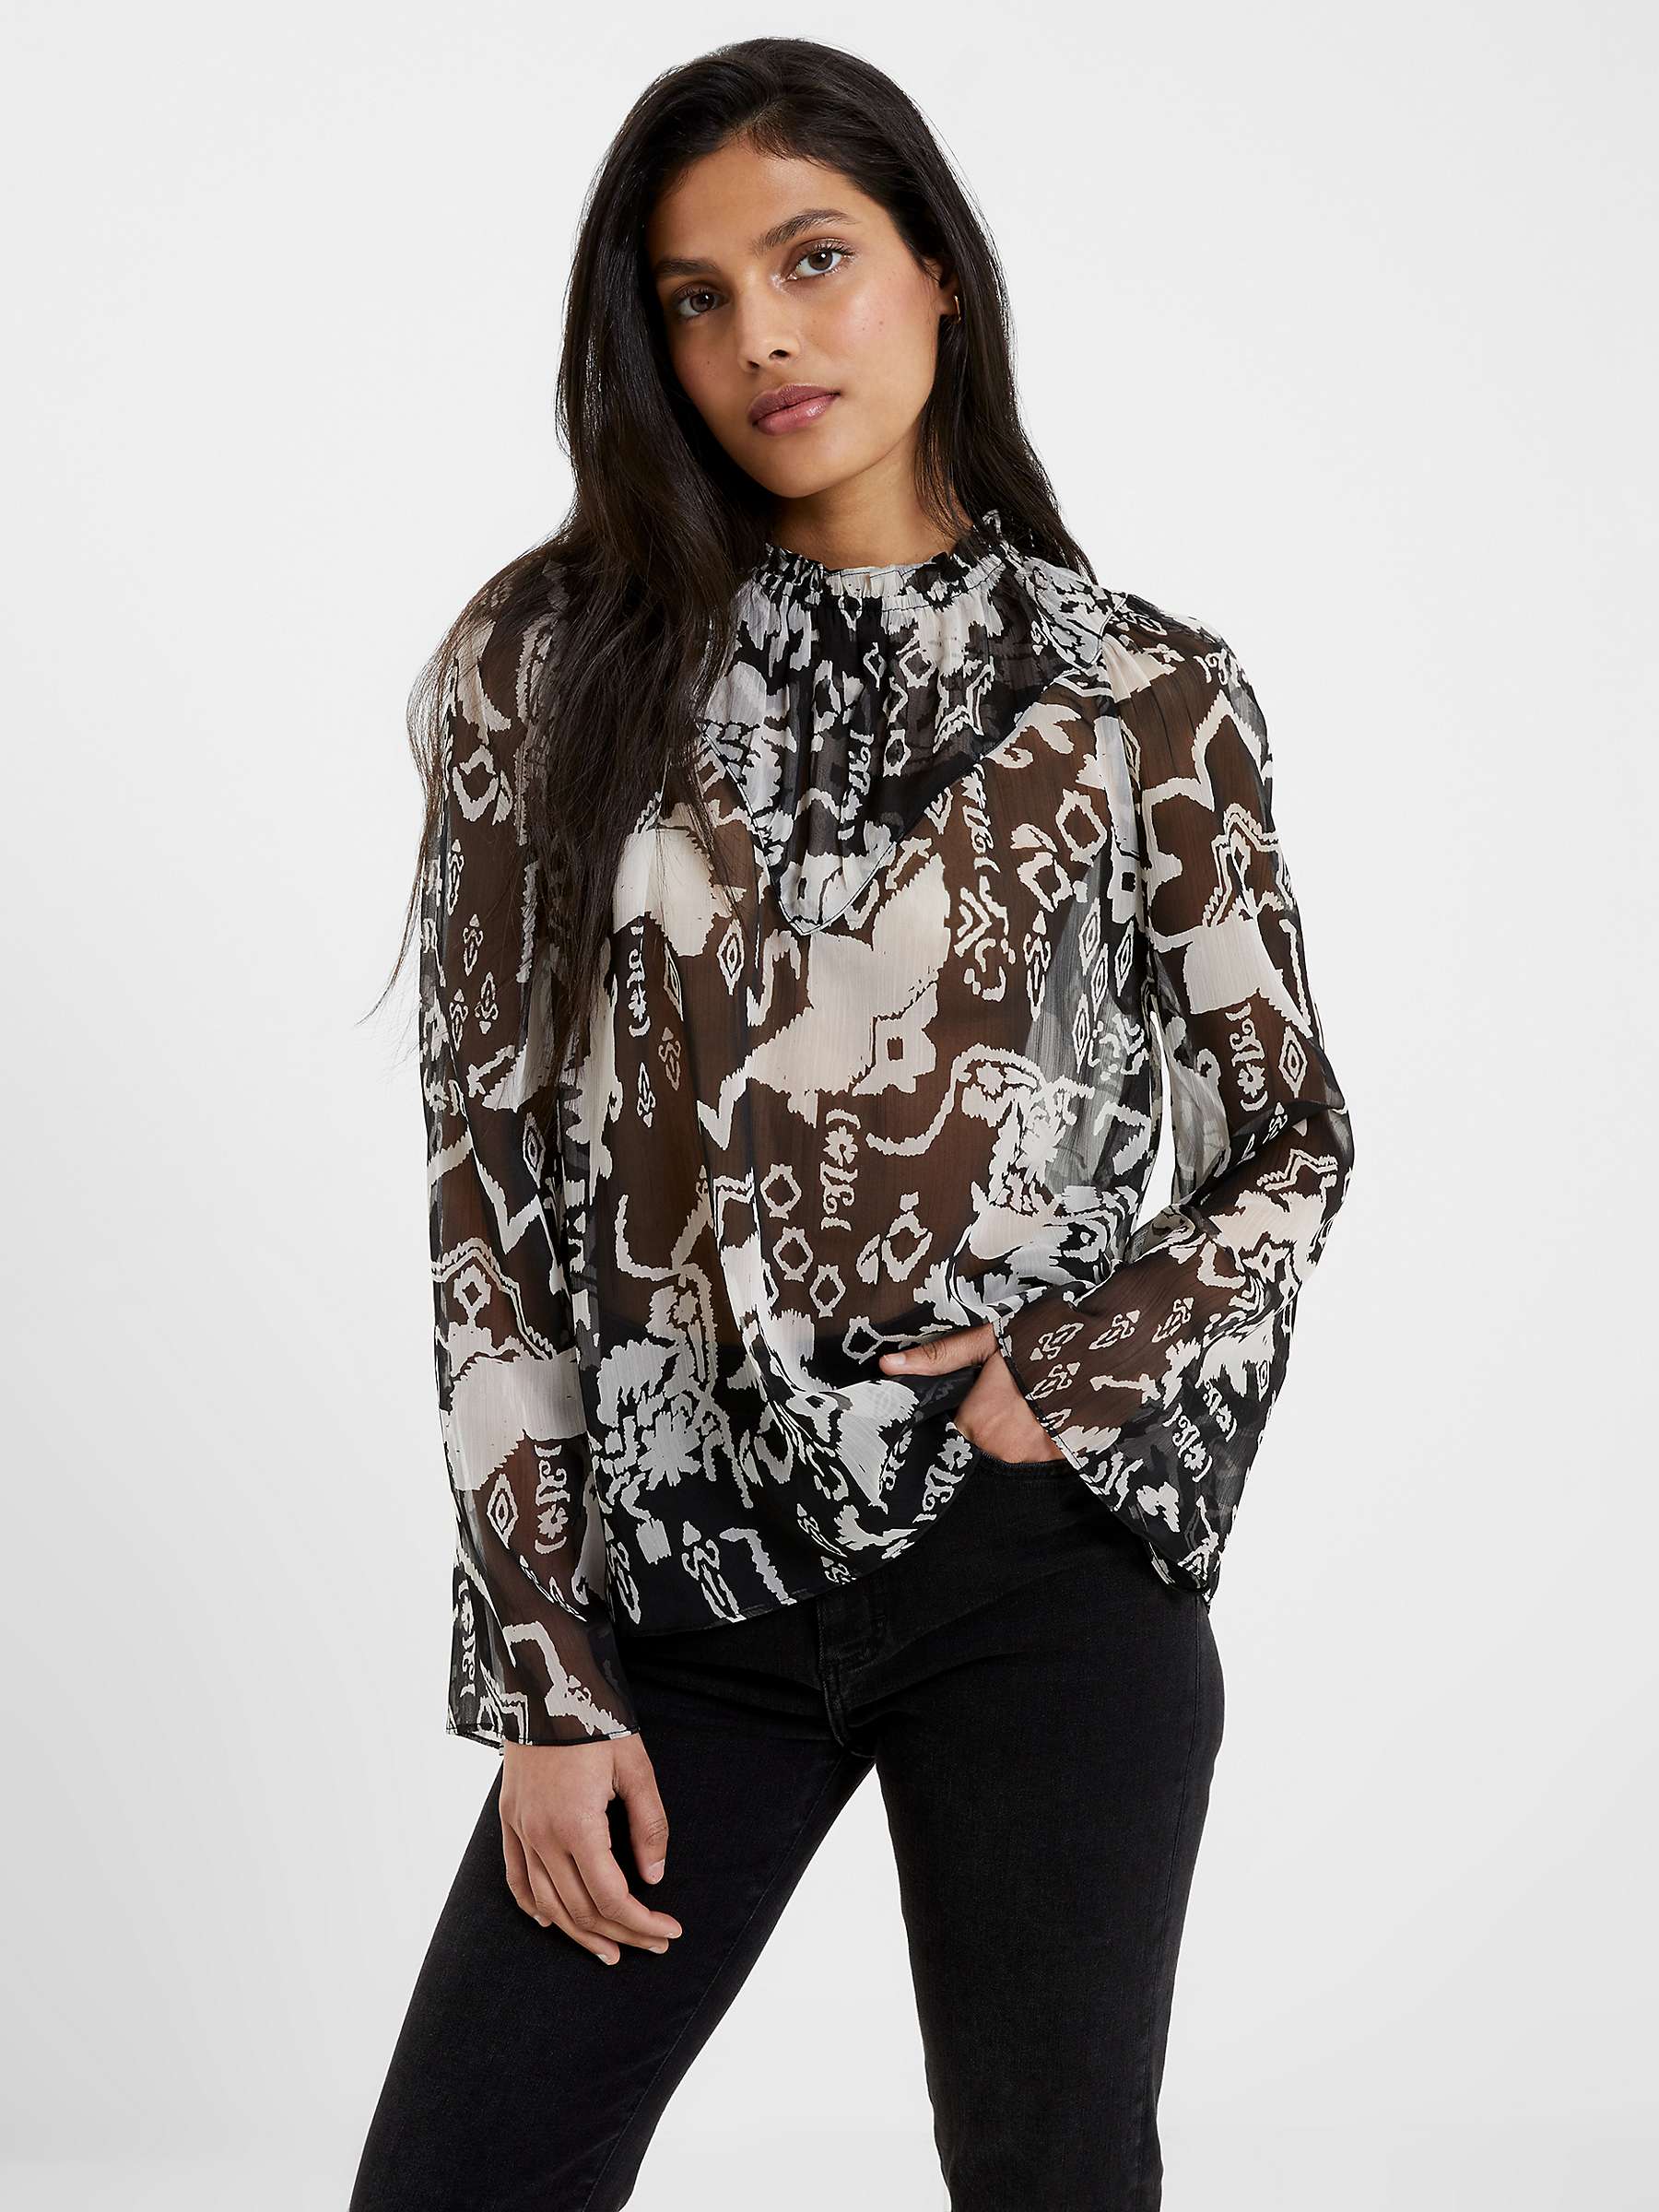 Buy French Connection Deon Hallie High Neck Top, Black/Cream Online at johnlewis.com